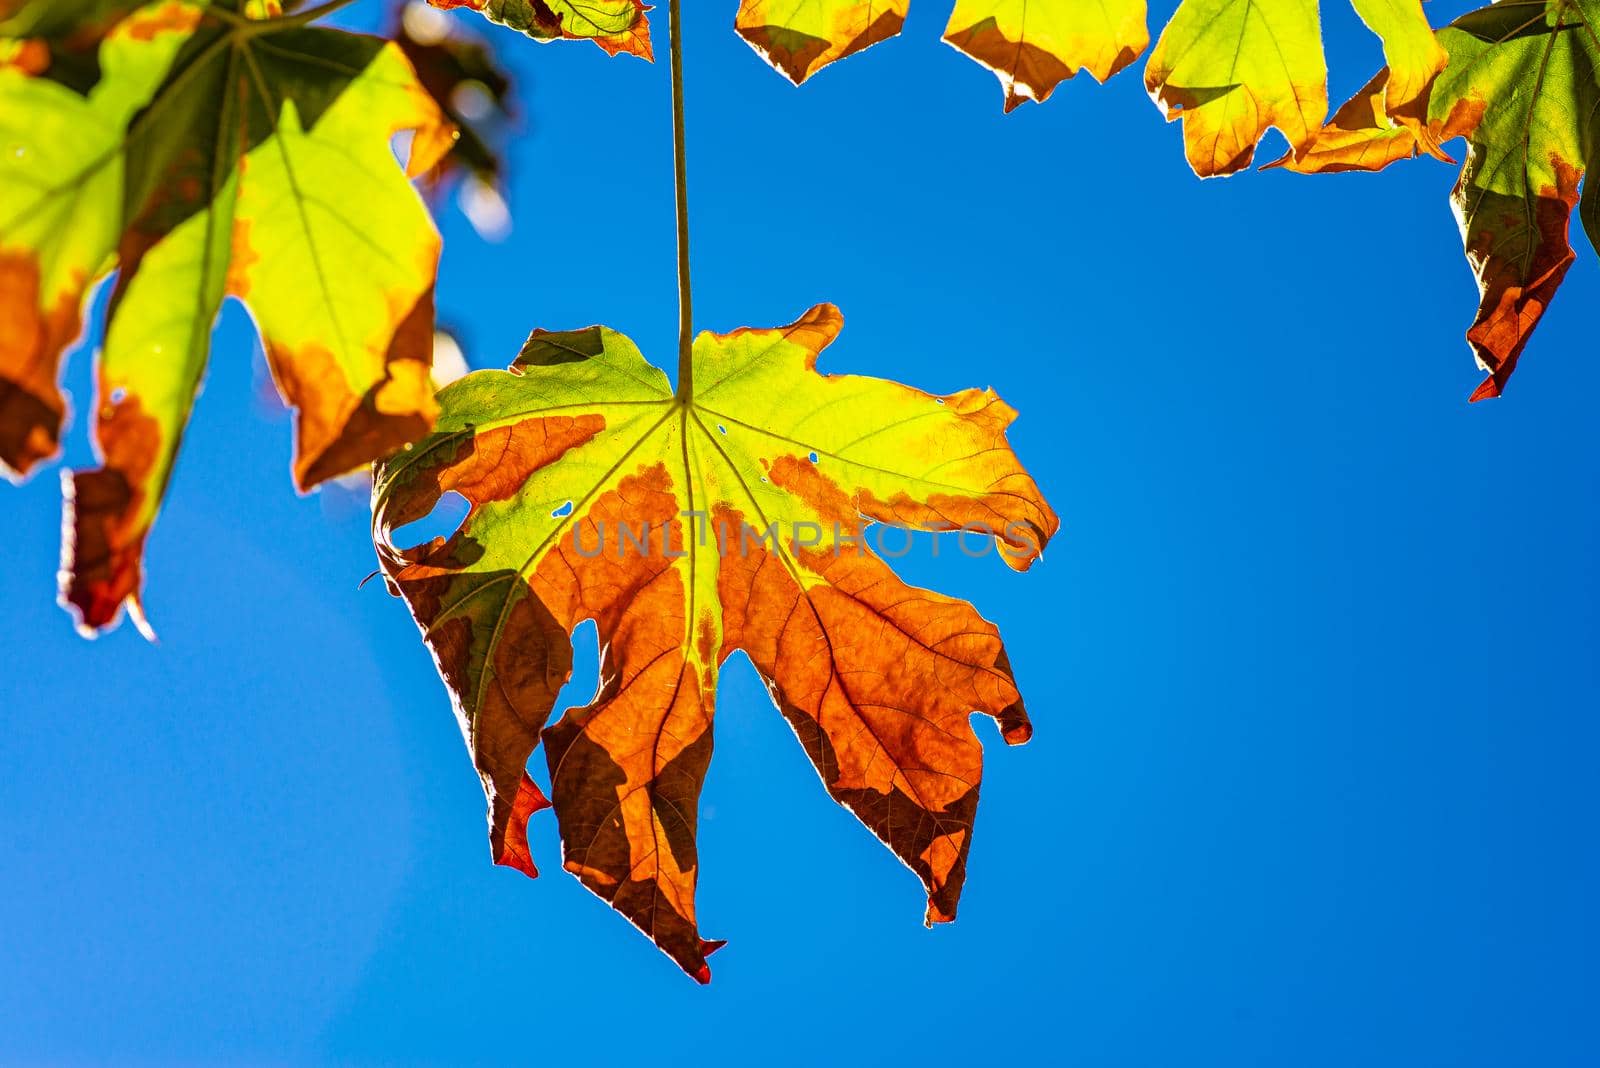 Yellowing maple tree leaves against blue sky on a crisp fall morning.